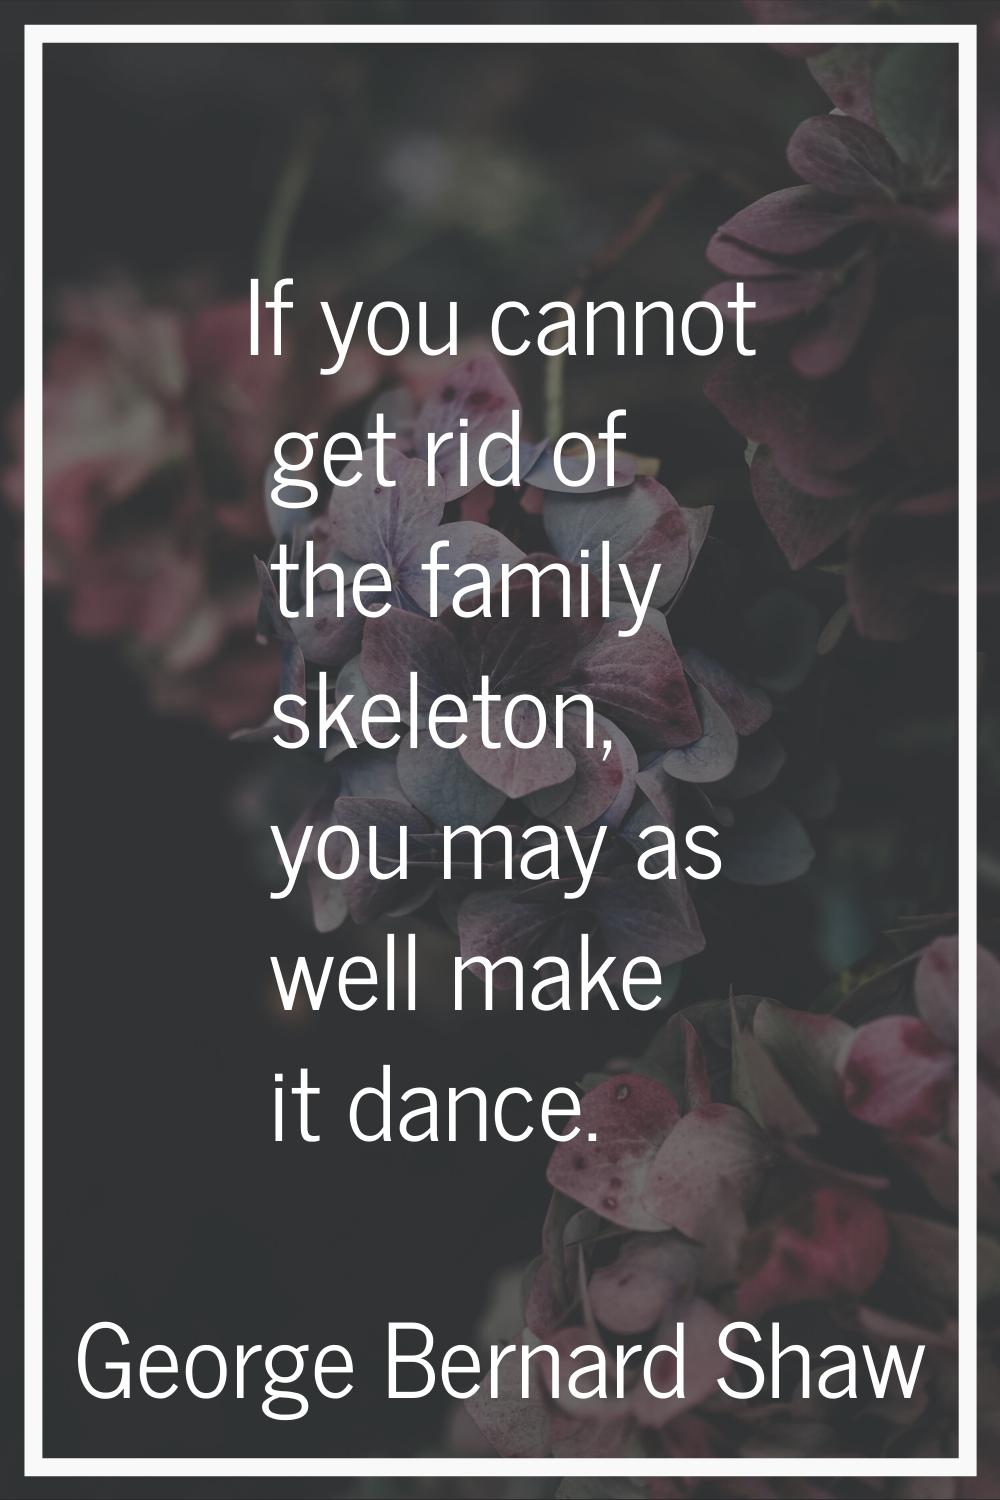 If you cannot get rid of the family skeleton, you may as well make it dance.